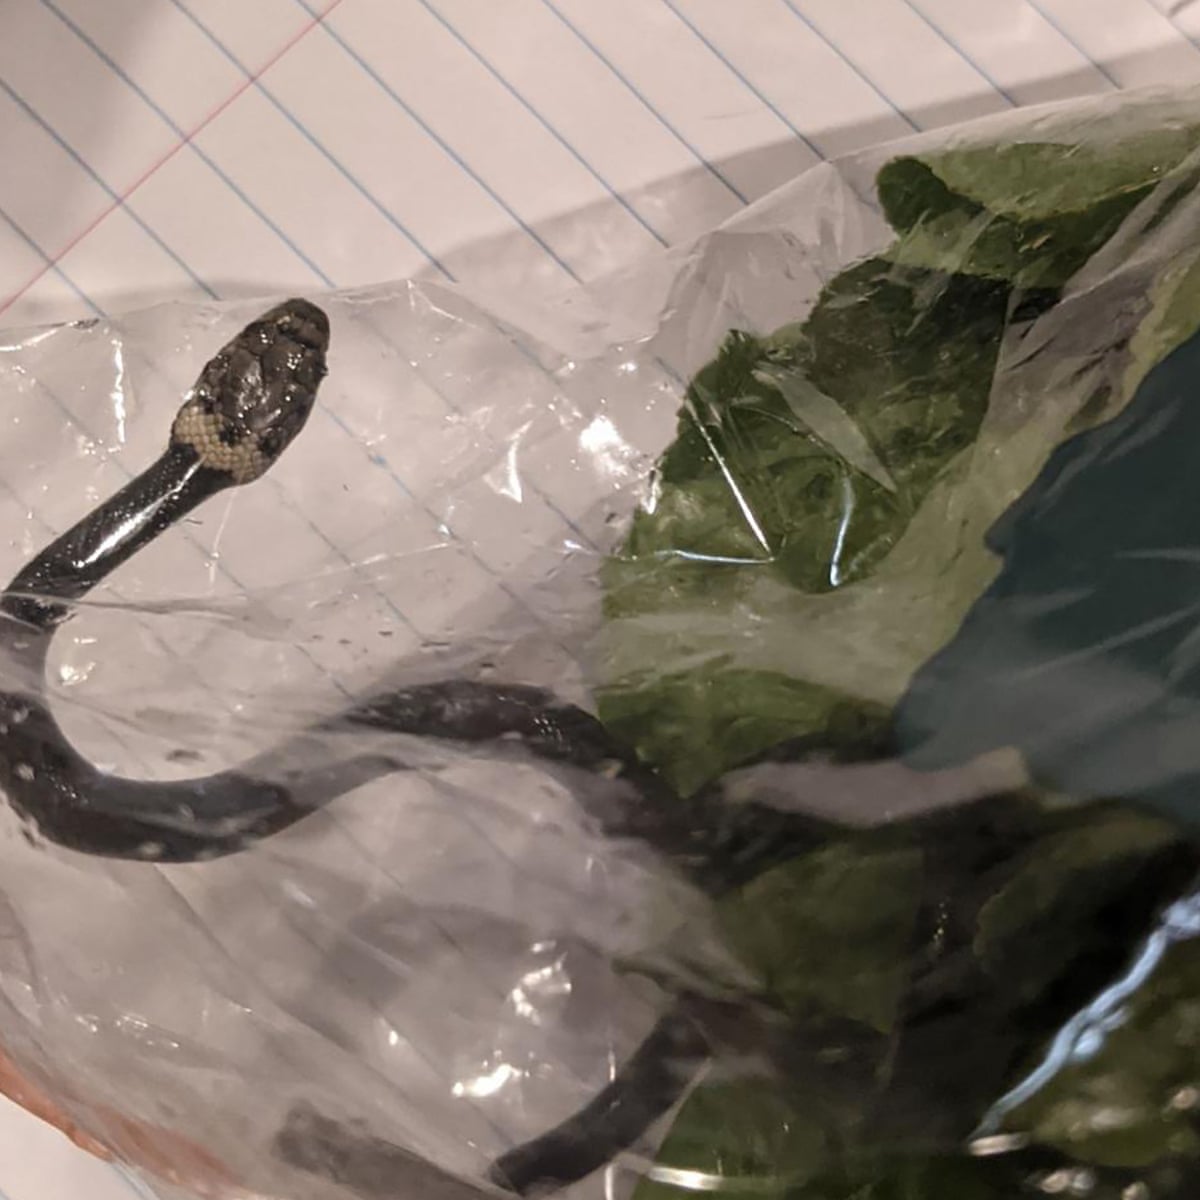 Snakes and lettuce: shoppers in Australia find venomous snake in Aldi fresh  produce bag | New South Wales | The Guardian